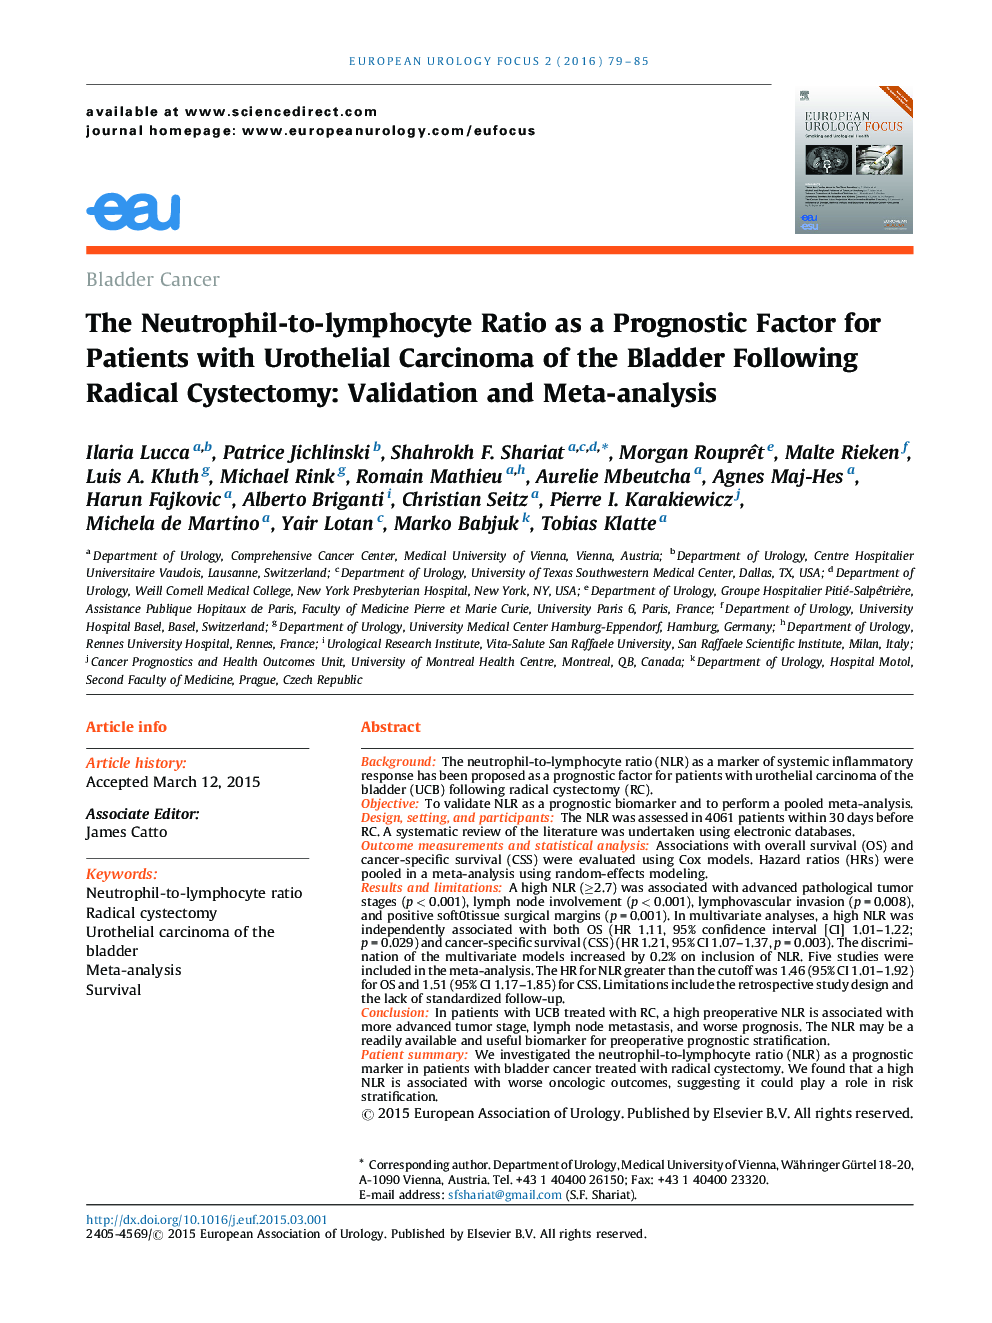 The Neutrophil-to-lymphocyte Ratio as a Prognostic Factor for Patients with Urothelial Carcinoma of the Bladder Following Radical Cystectomy: Validation and Meta-analysis